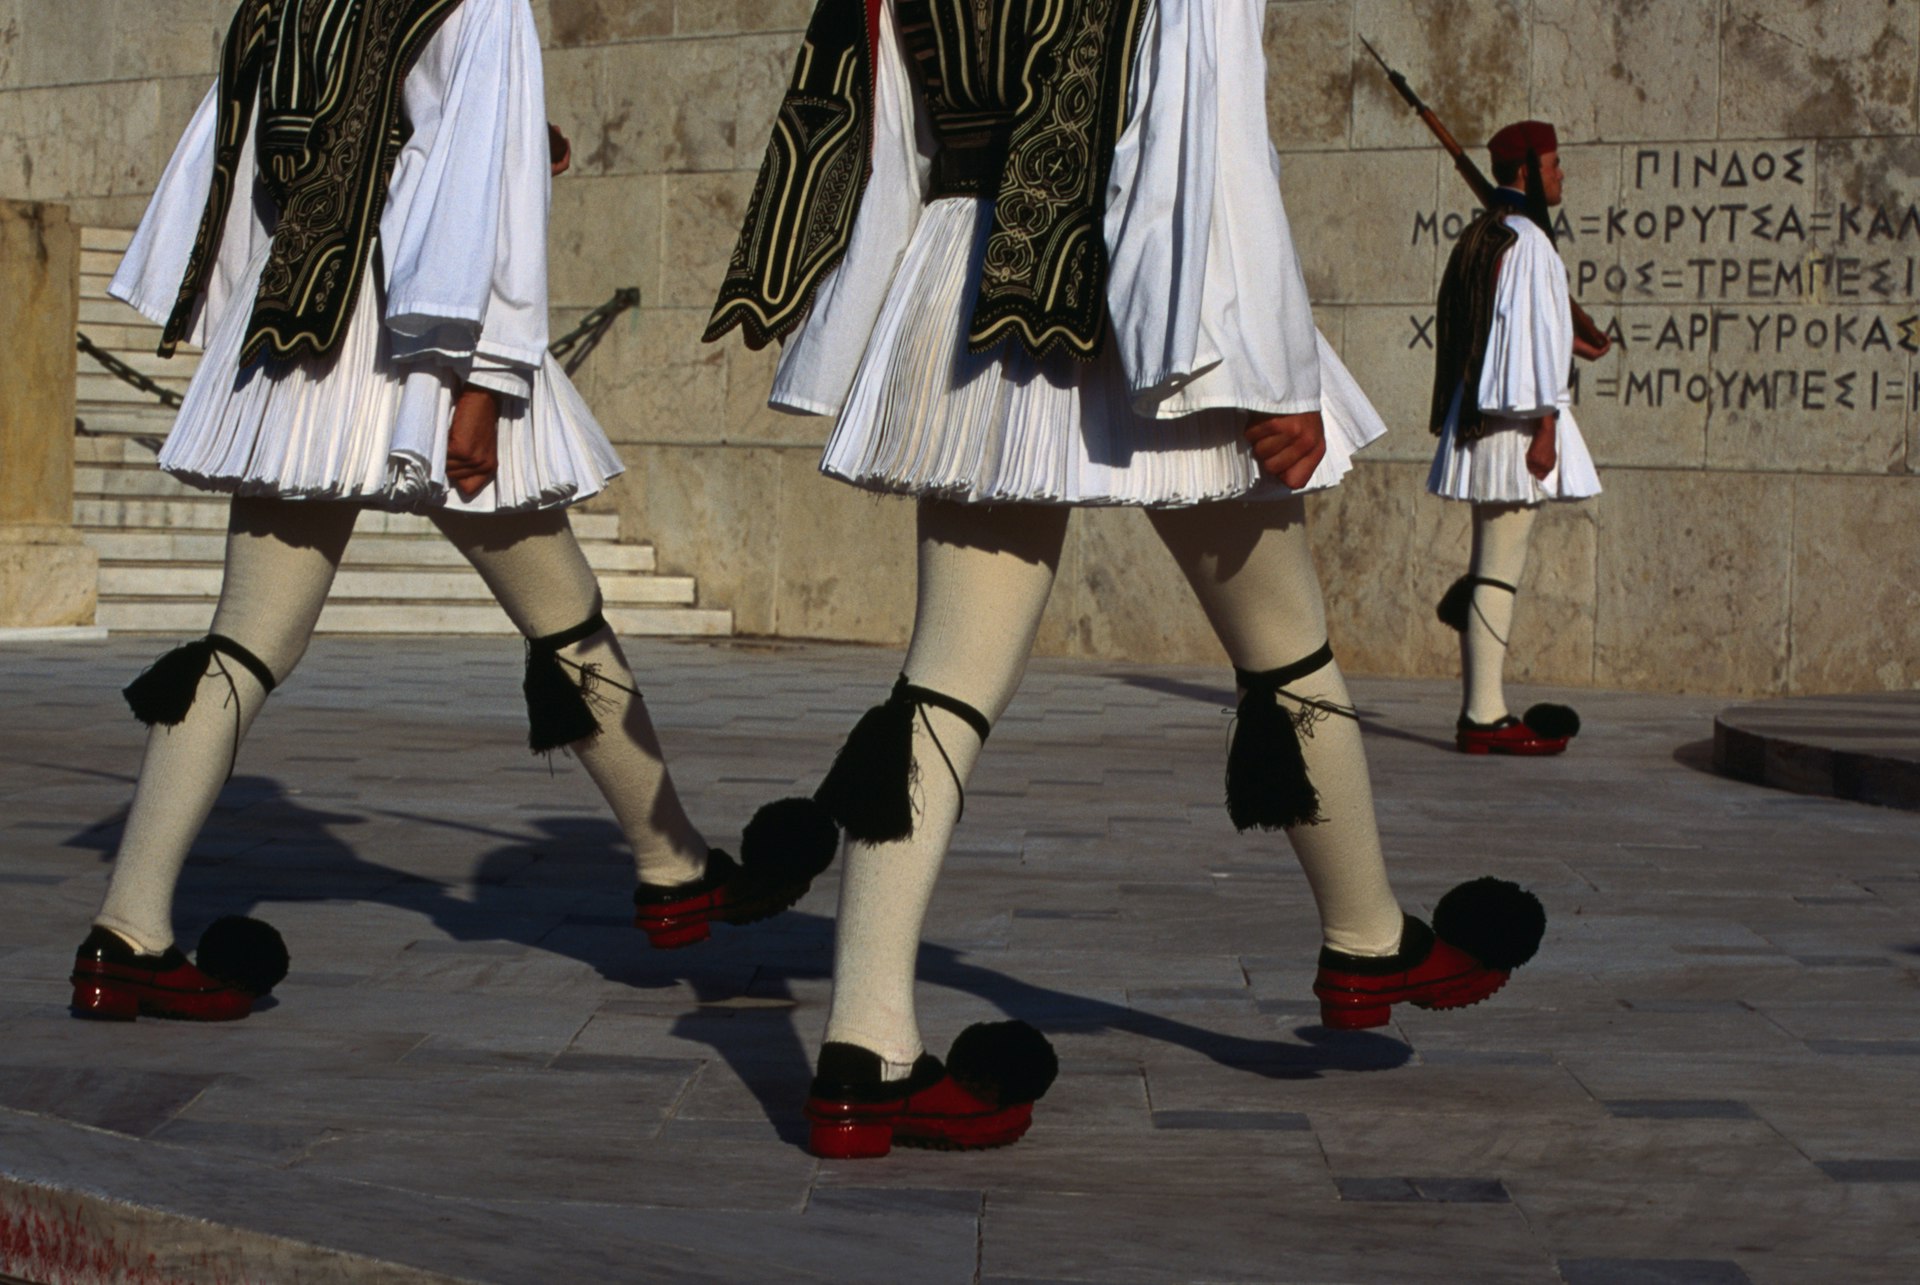 Guards outside the Greek Parliament buildings